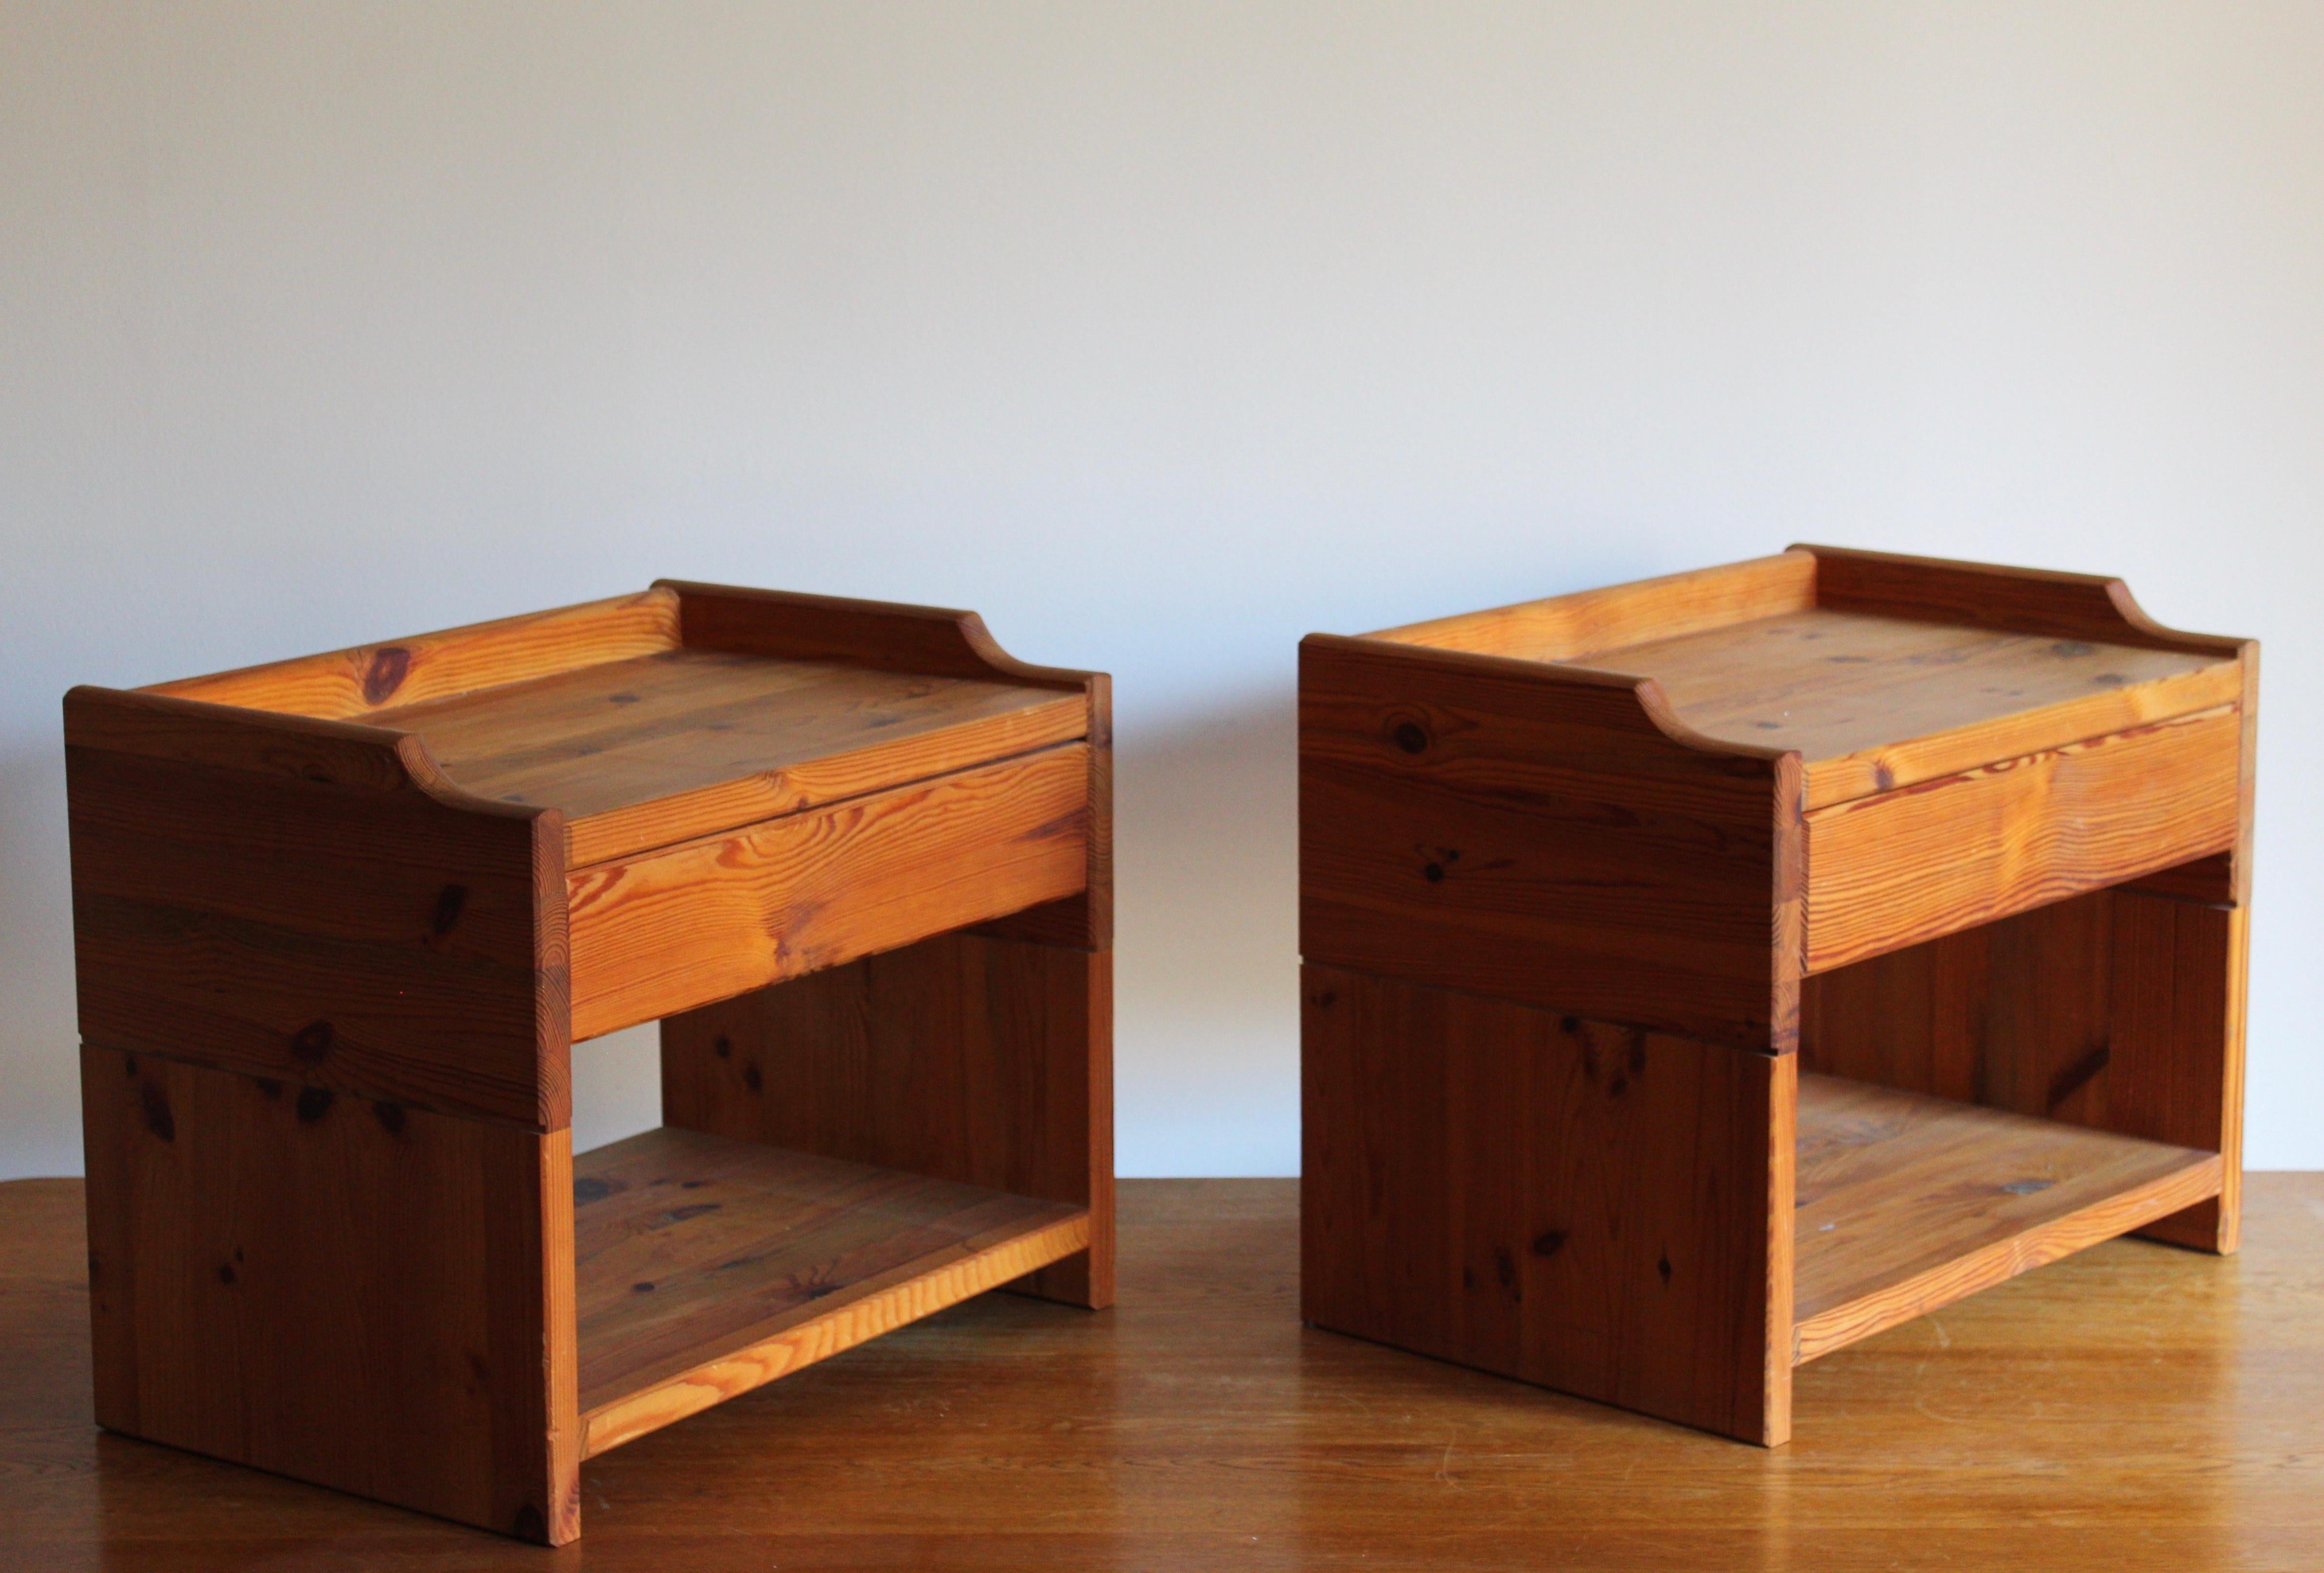 A set of bedside cabinets / tables / nightstands. Designed and produced in Sweden, 1970s. In solid pine.

Other designers working in similar style and materials include Axel Einar Hjorth, Roland Wilhelmsson, Pierre Chapo, and Charlotte Perriand.